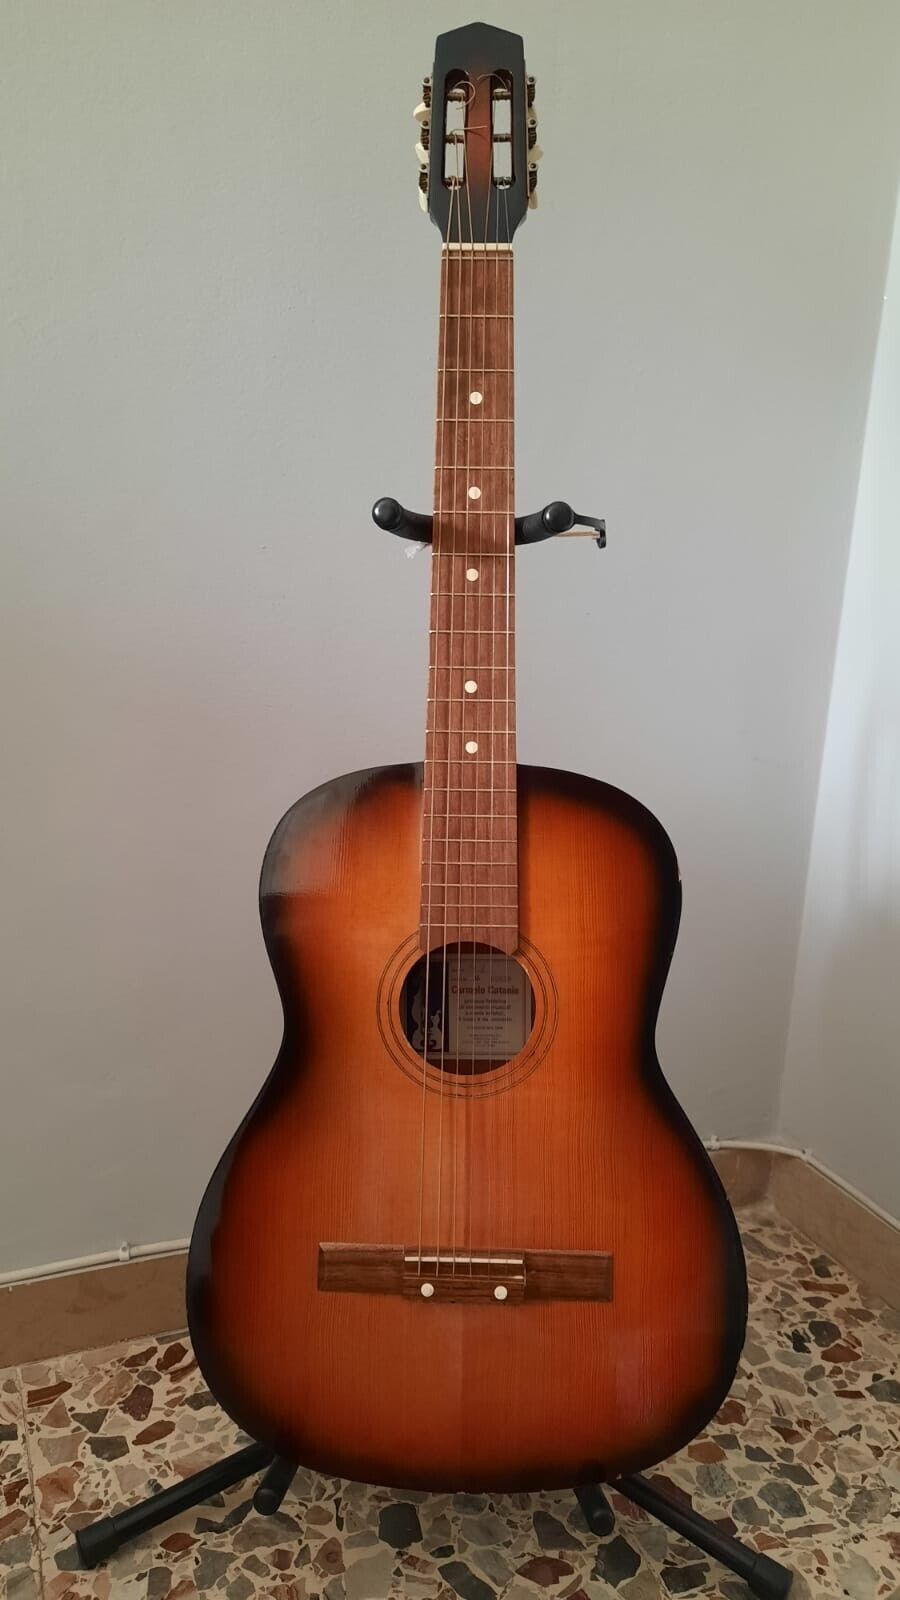 Acoustic Guitar Brand Carmelo Catania, Fine Years 70. Mint Condition